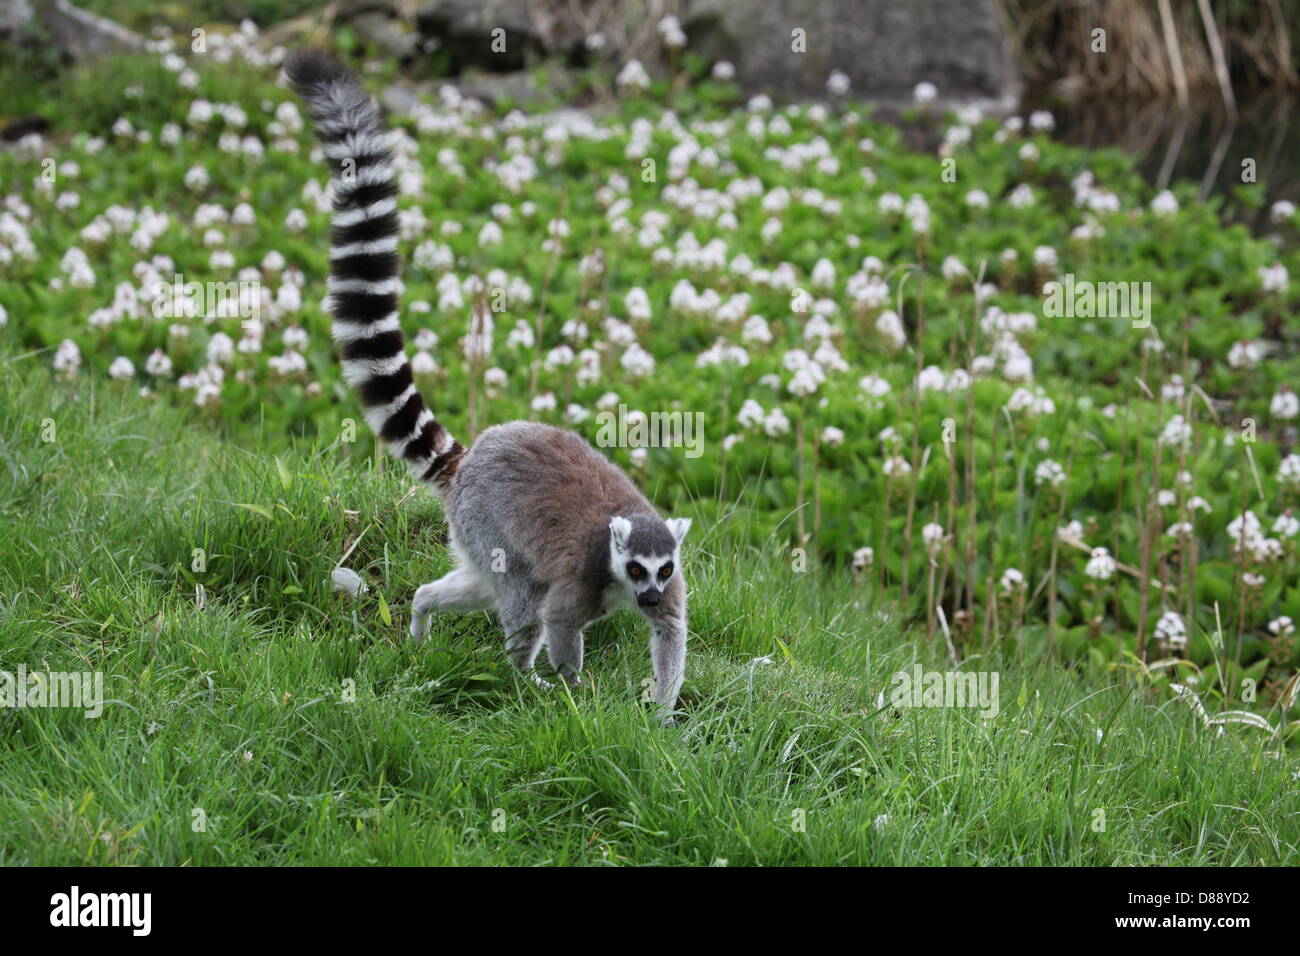 ZSL Whipsnade Zoo, Bedfordshire, UK. 22nd May 2013. Ring-tailed lemurs (Lemur Catta) try out the custom-made climbing frame to celebrate the launch of the brand new adventure play area, Hullabazoo. Credit:  Neville Styles / Alamy Live News Stock Photo